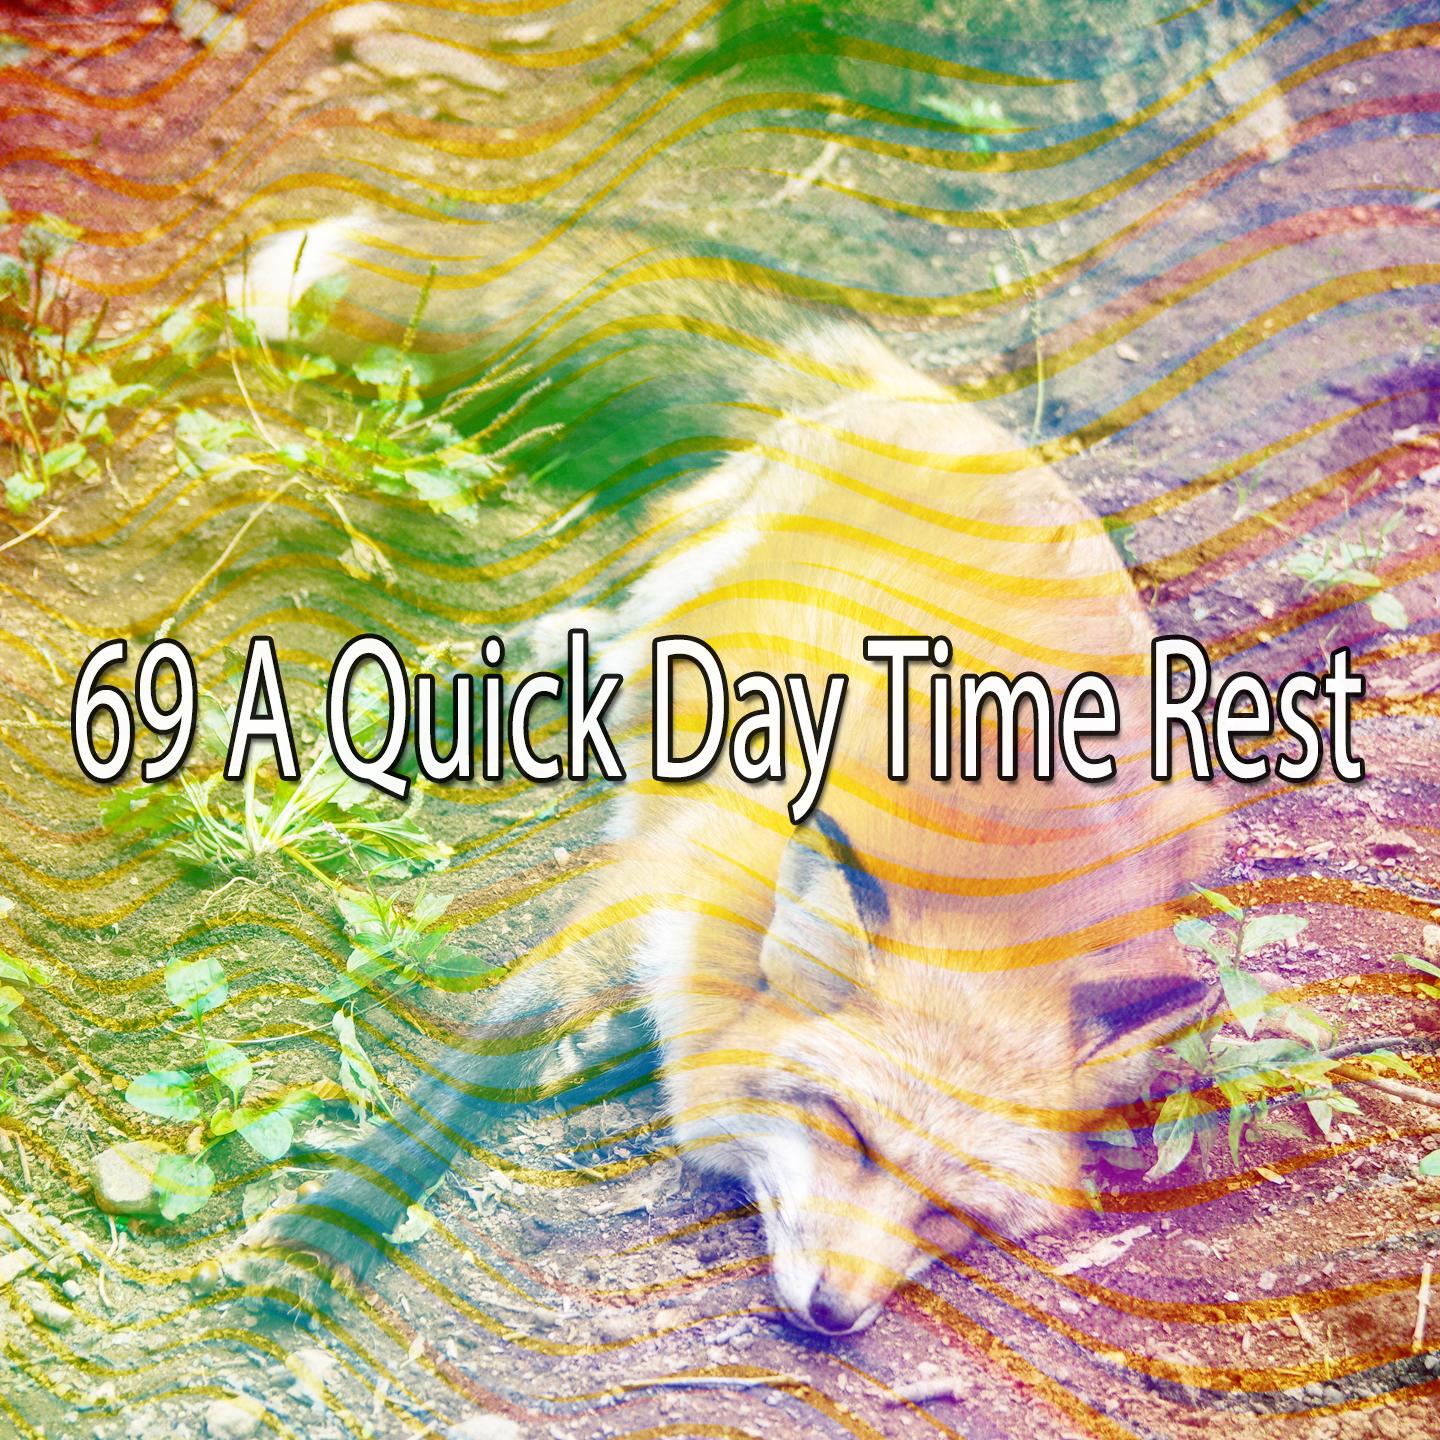 69 A Quick Day Time Rest